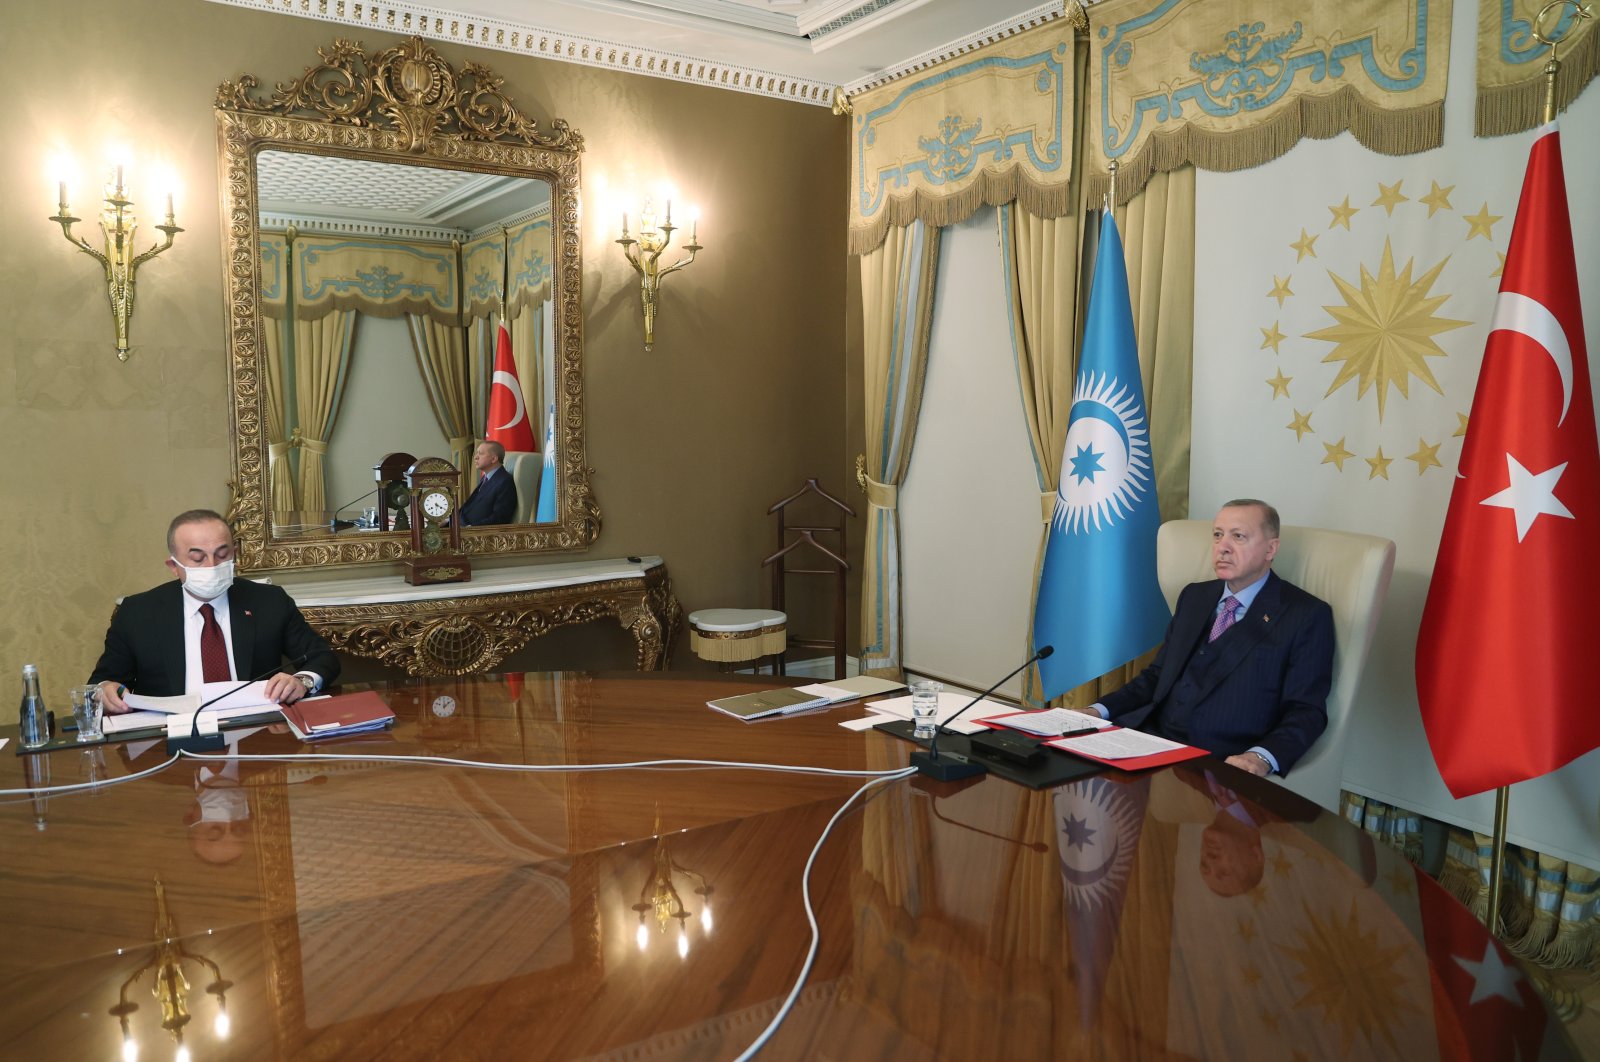 President Recep Tayyip Erdoğan (R) attends an online meeting of Turkic Council, Istanbul, Turkey, March 31, 2021. (AA Photo)
